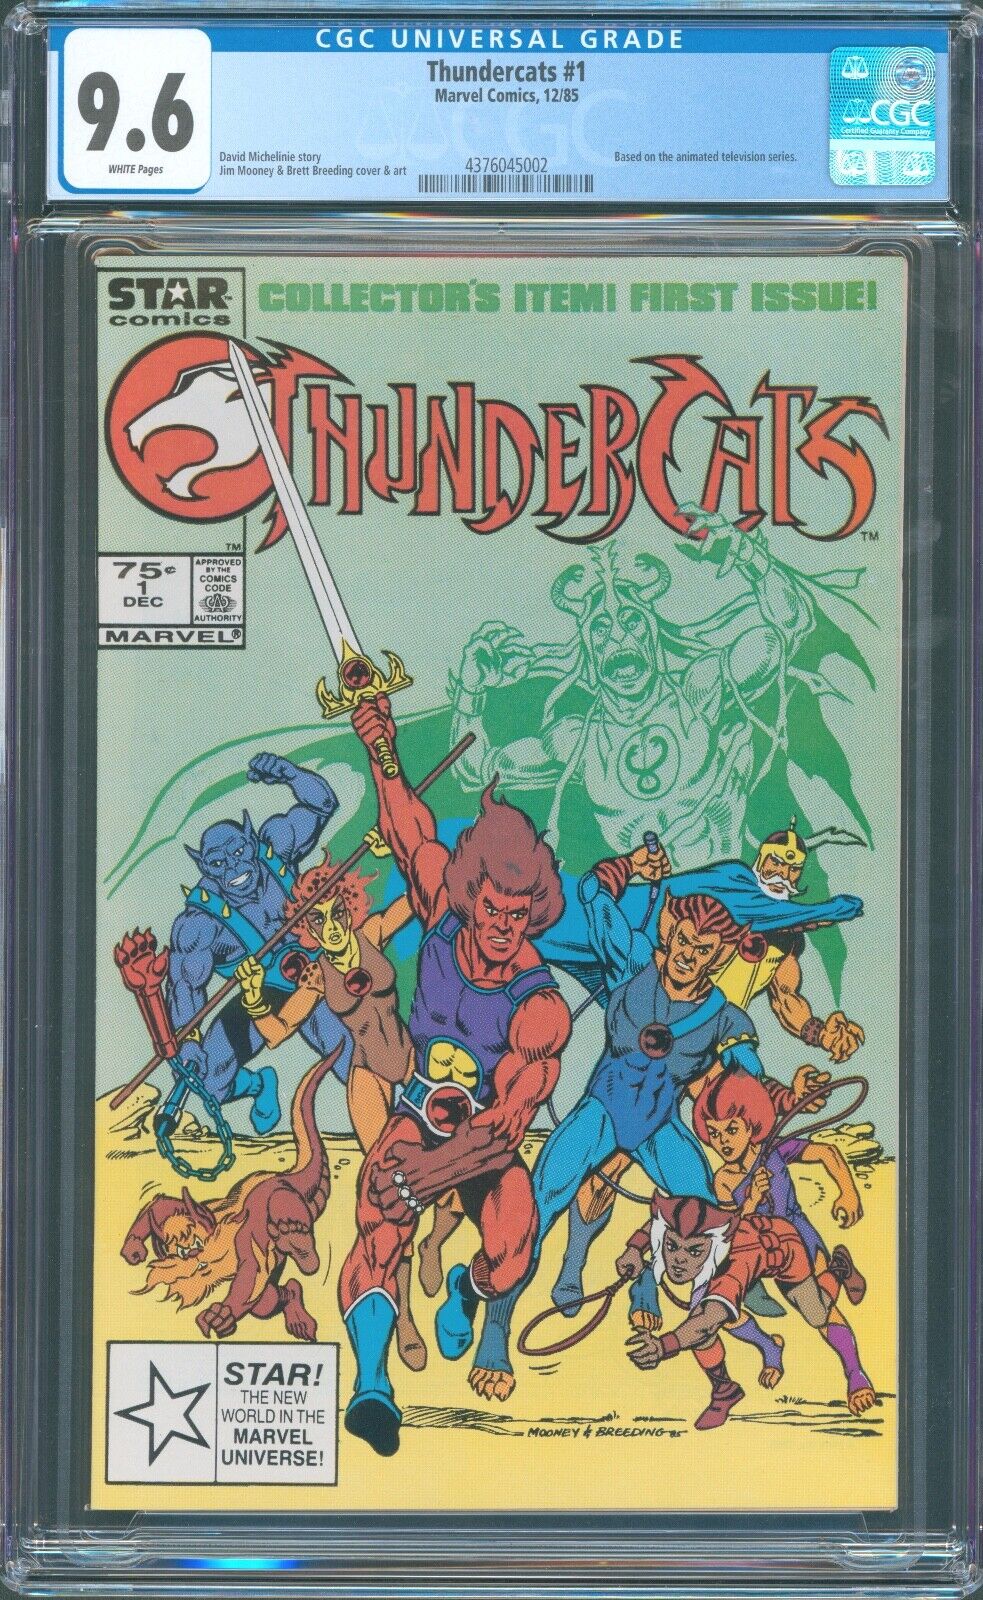 Thundercats #1, Marvel (1985), CGC 9.6 (NM+) - White Pages